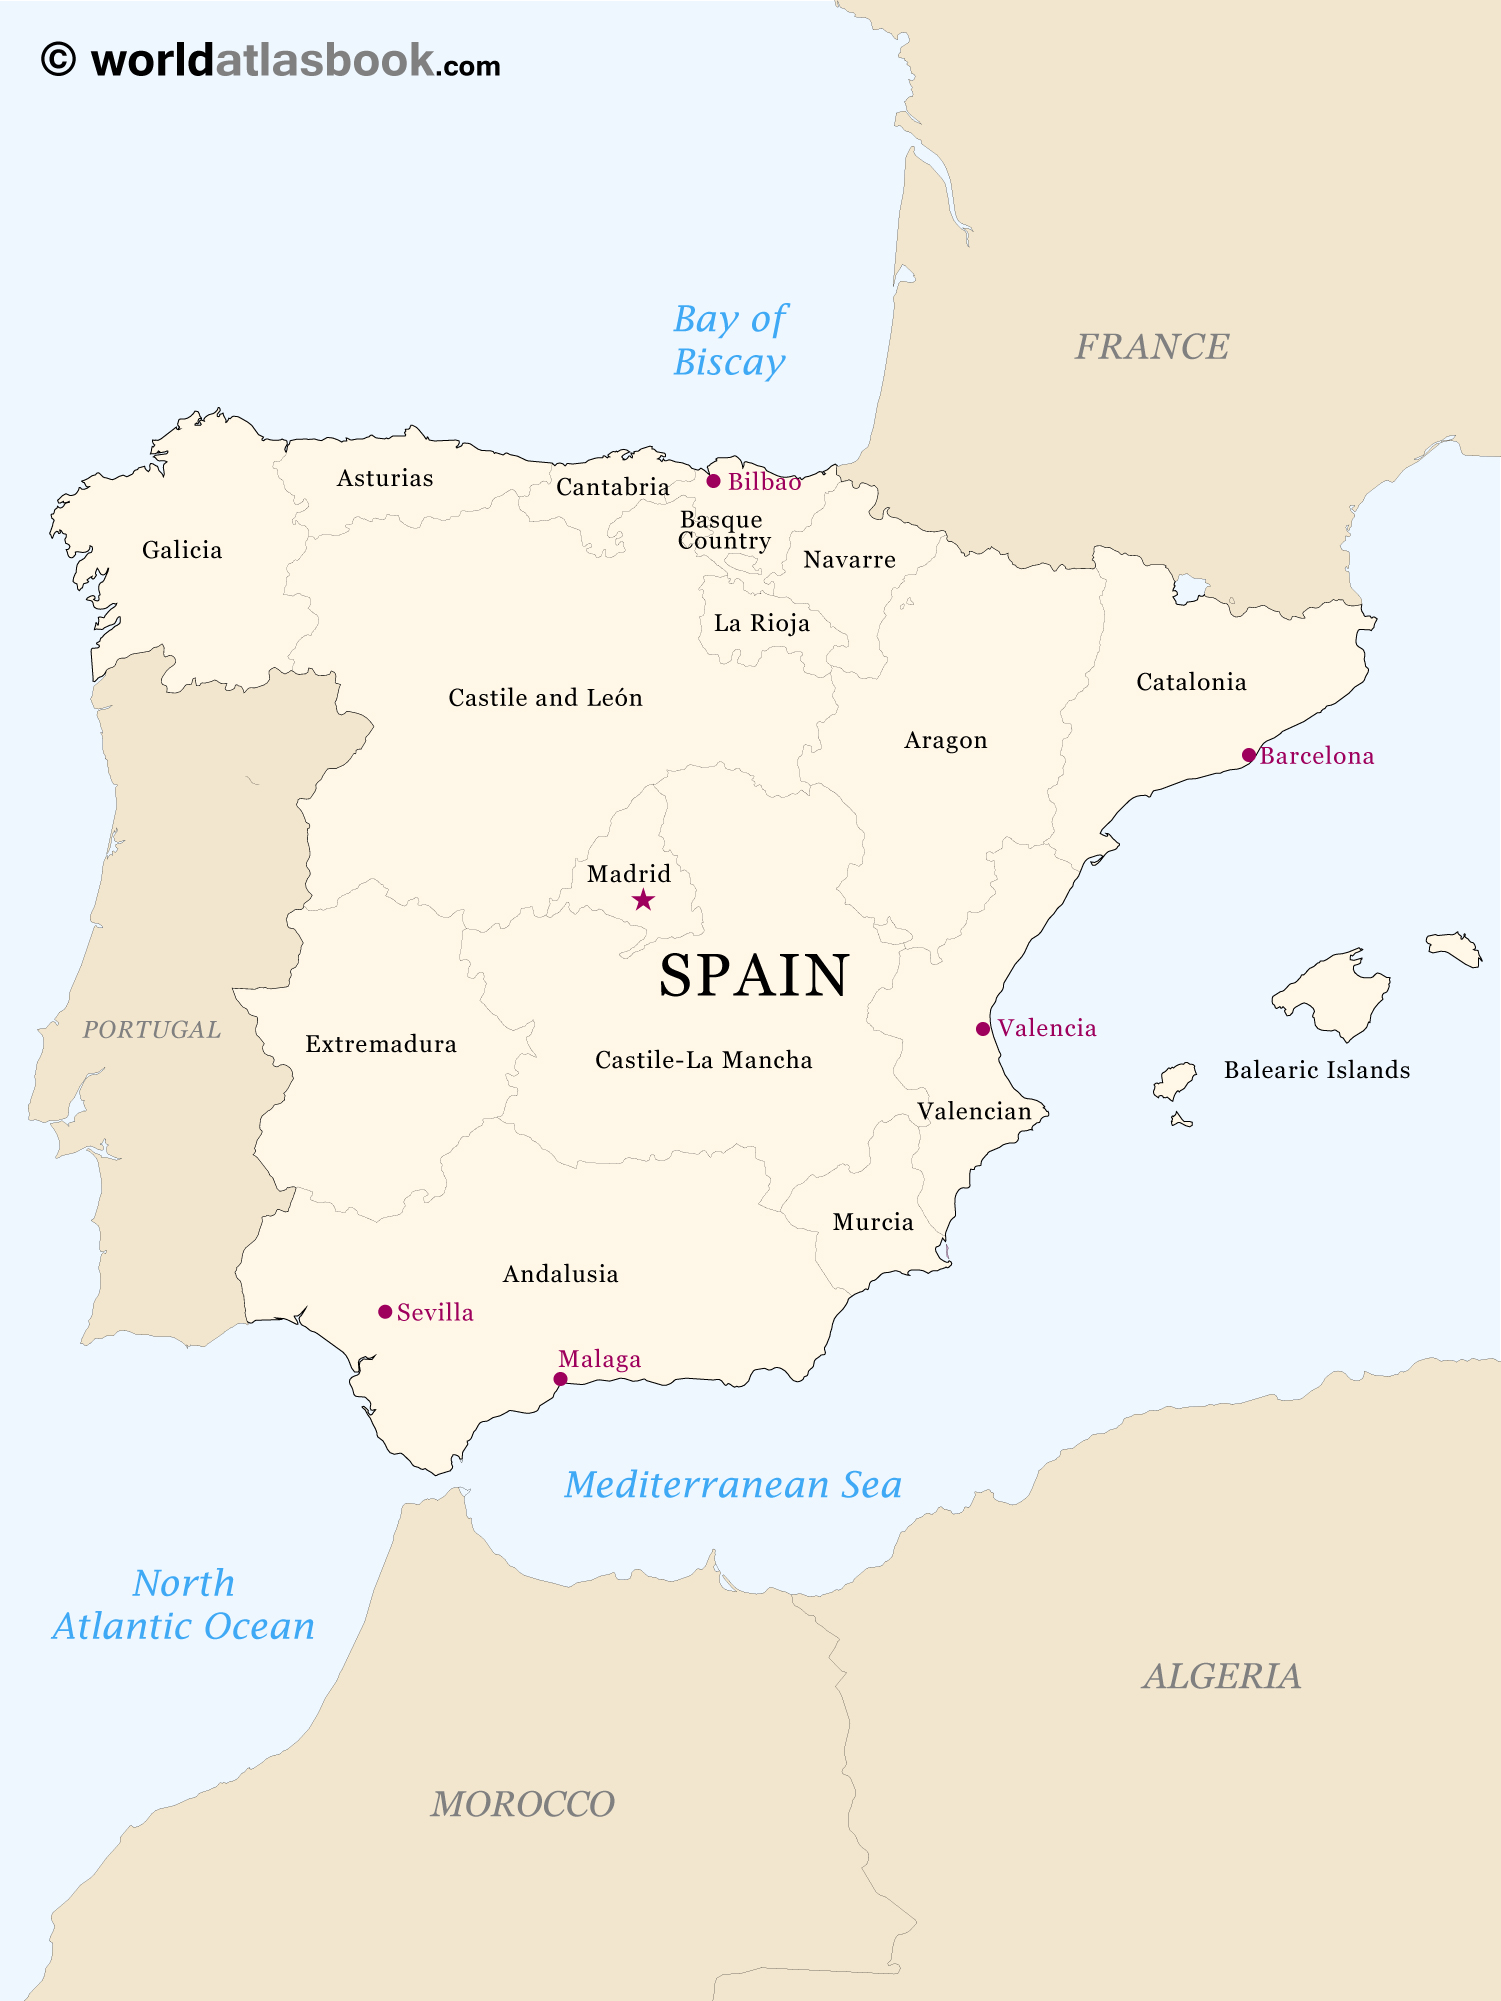 5 Best Images of Printable Map Of Spain Spain Map Outline, Printable